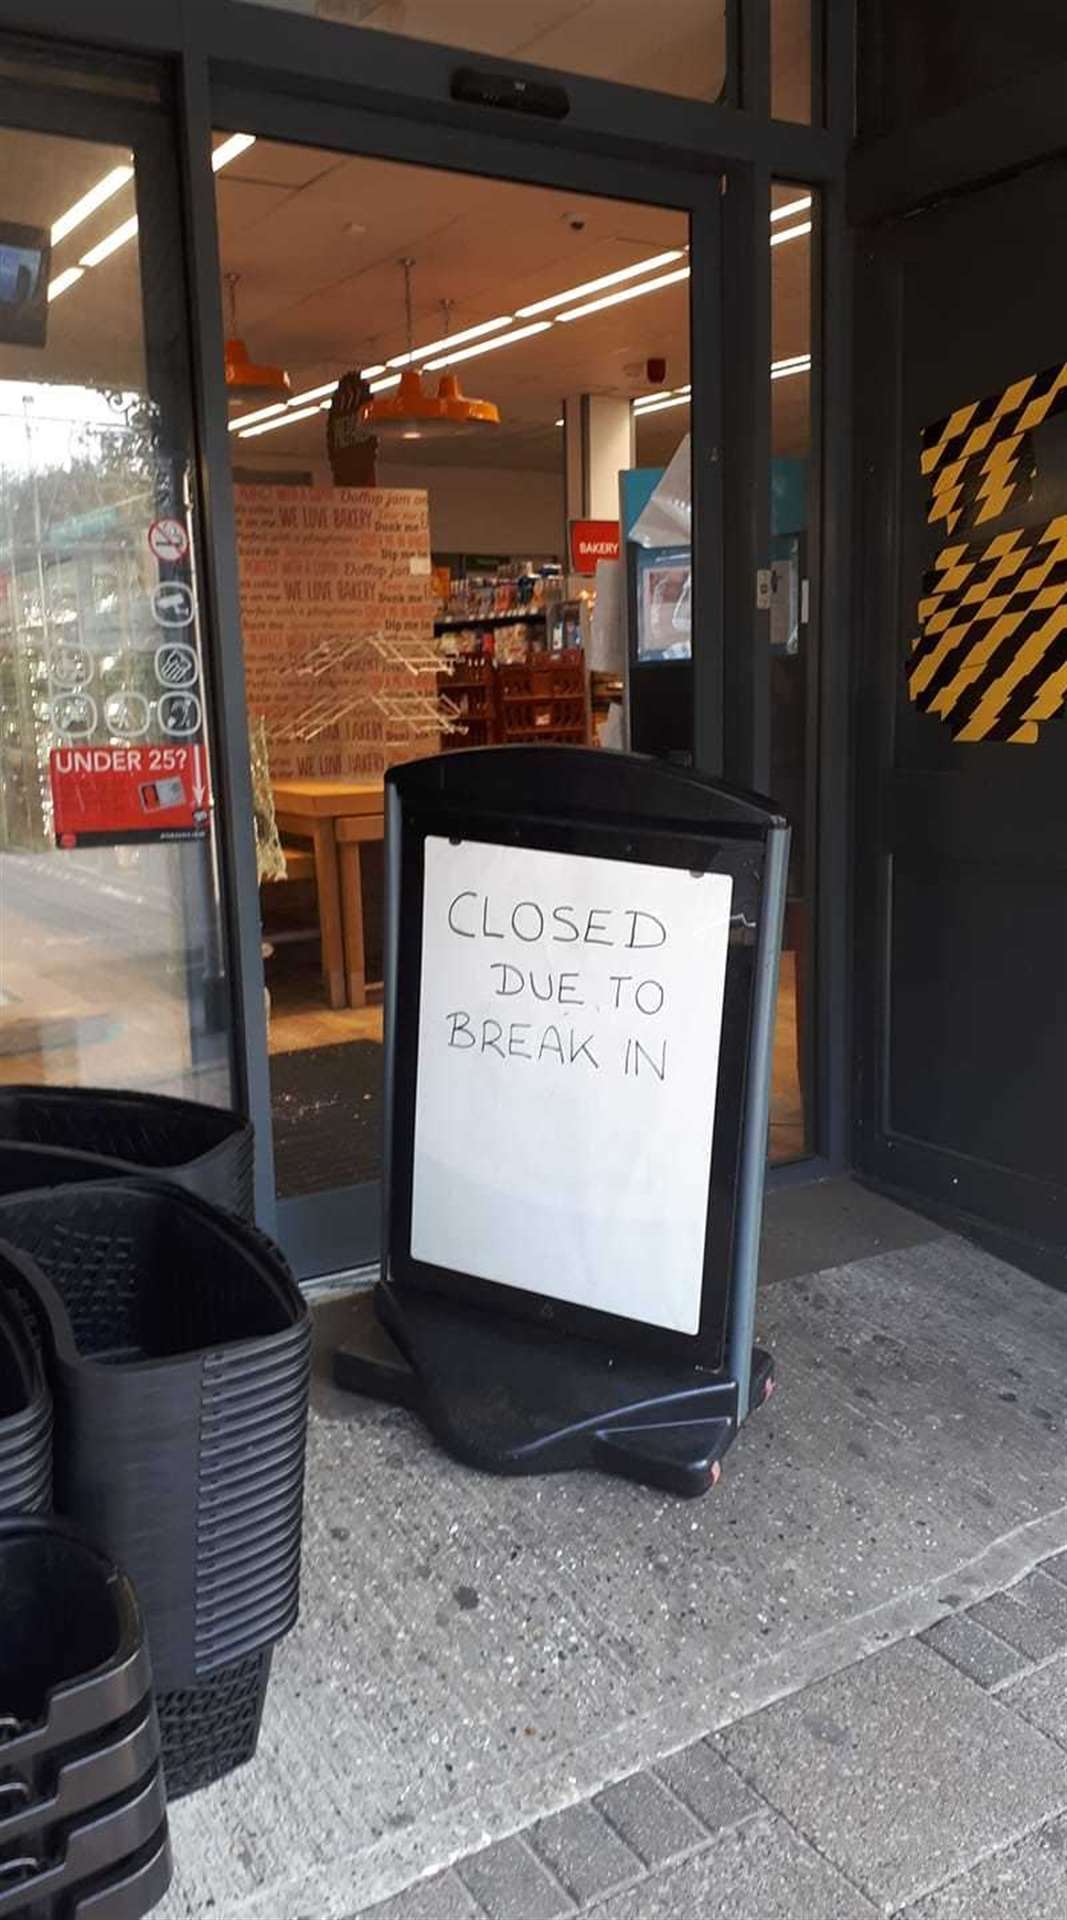 The store was closed while police investigated but has since reopened. Picture: Wilfred Jenkins